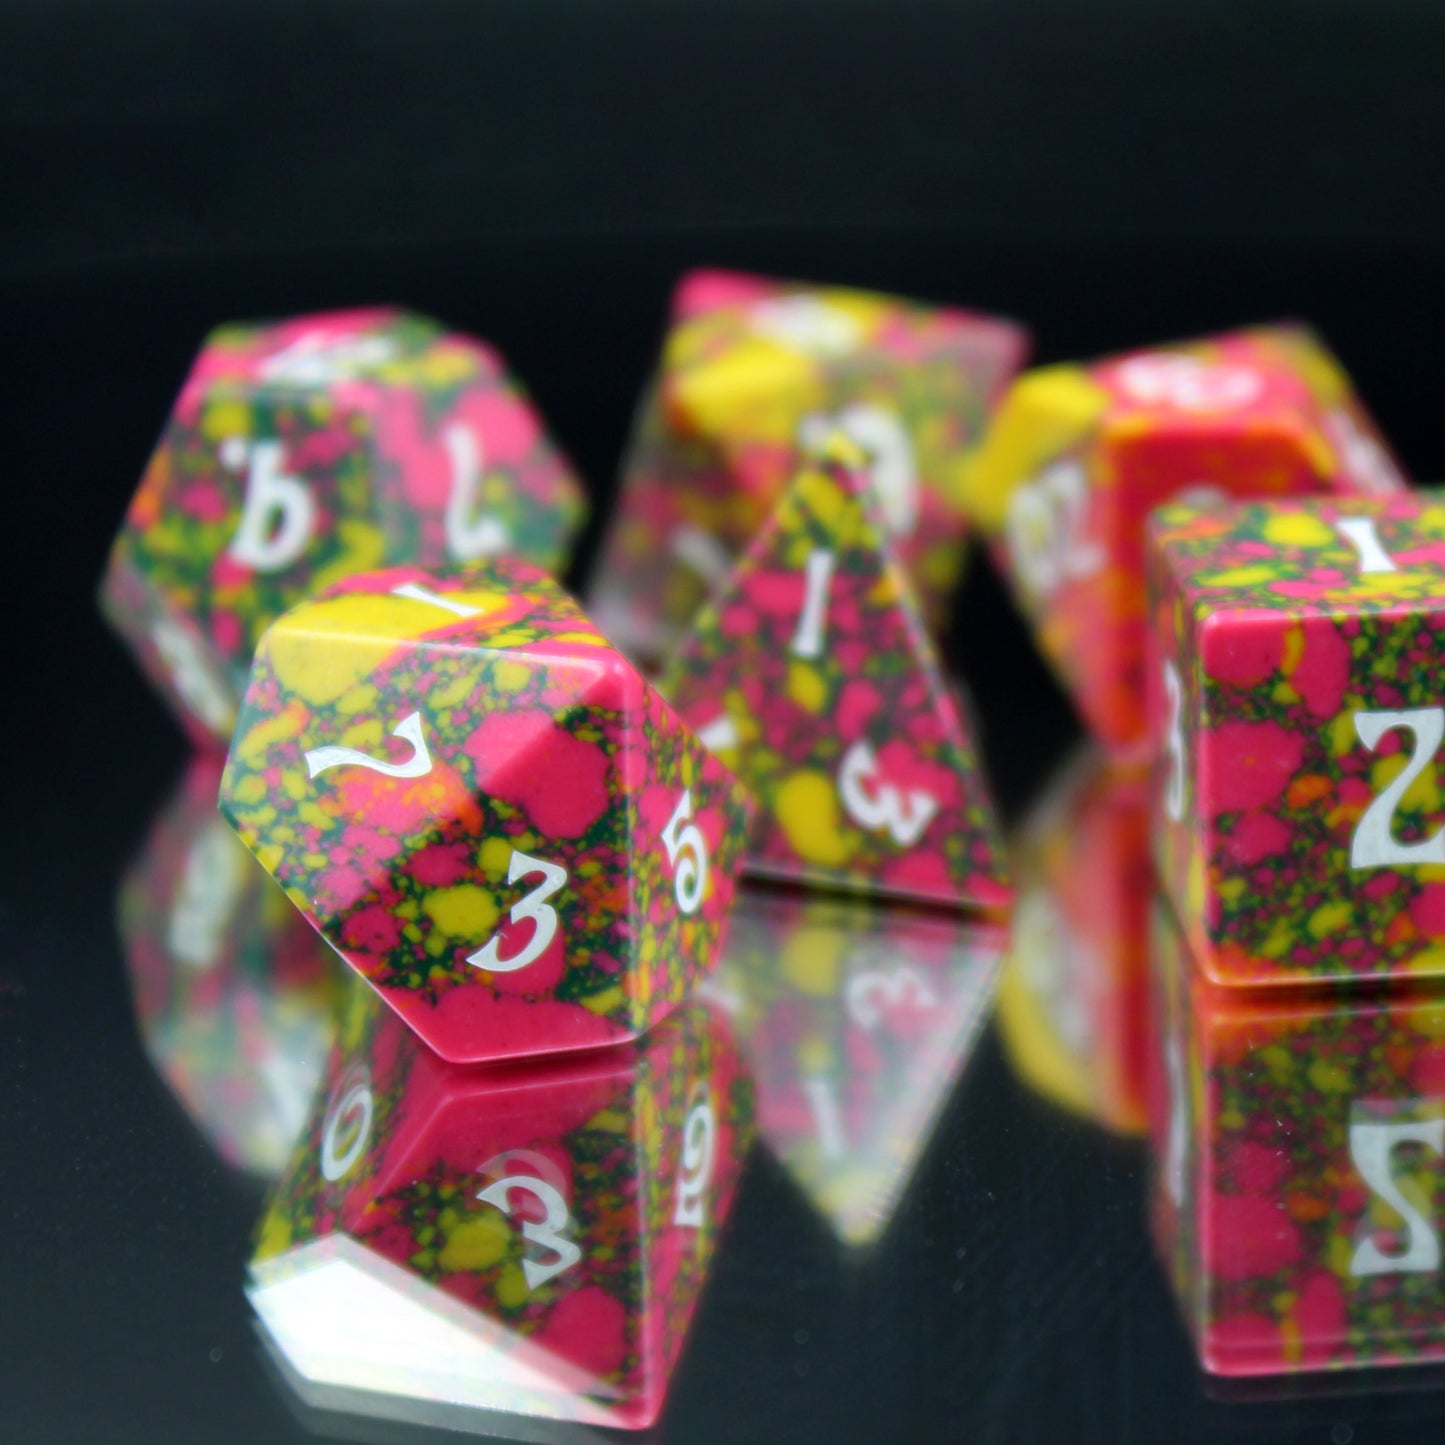 Space Candy Groovy Stone Dice Set